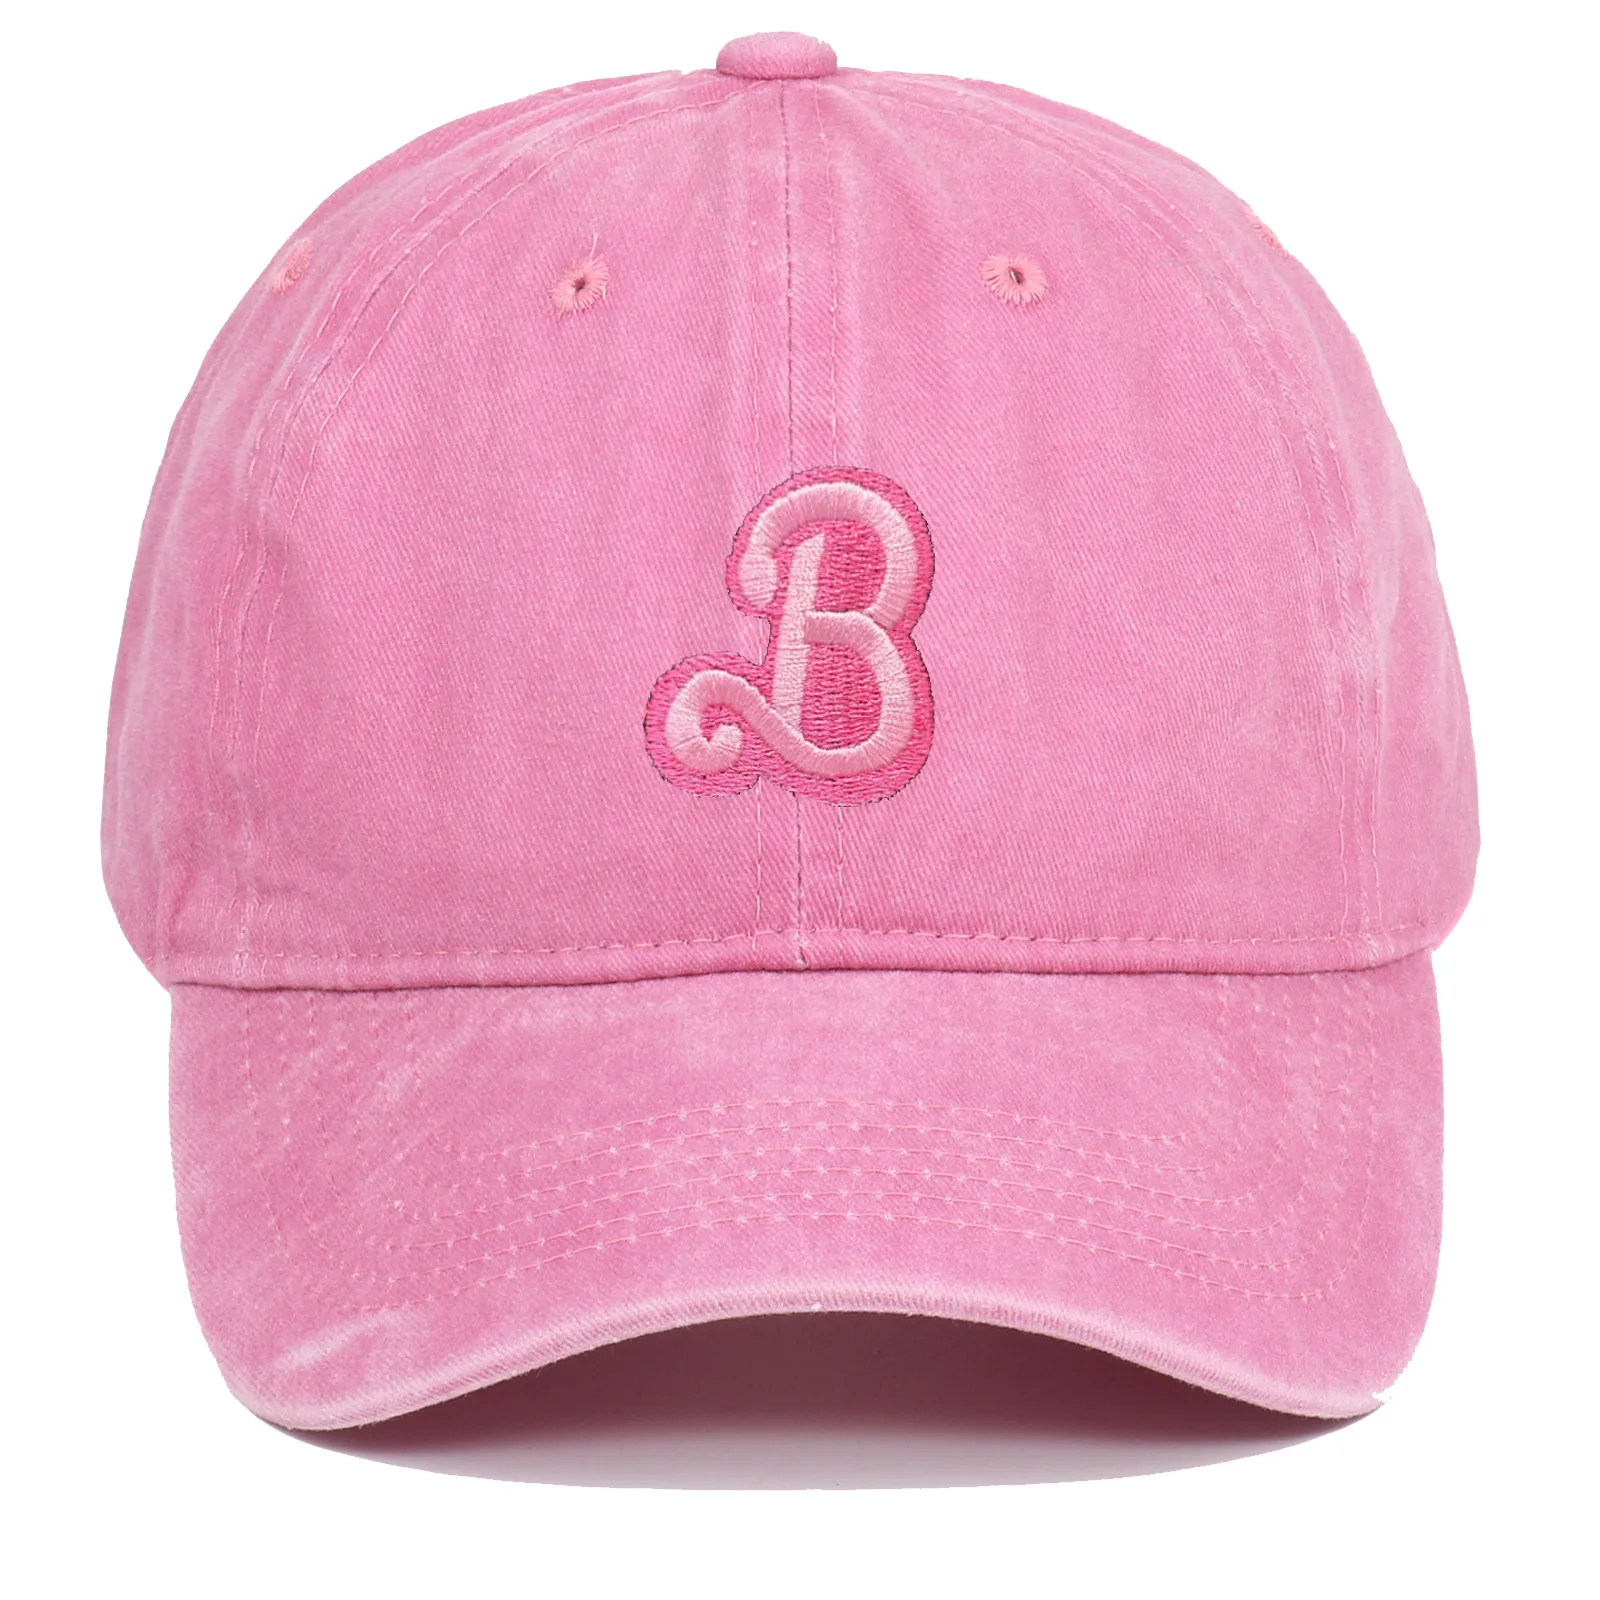 

Pink B High Quality Vintage Retro Distressed Stone Washed 9 Colors Cotton Chino Toddler Boy Baseball Dad Hat Fit Cap for Kids